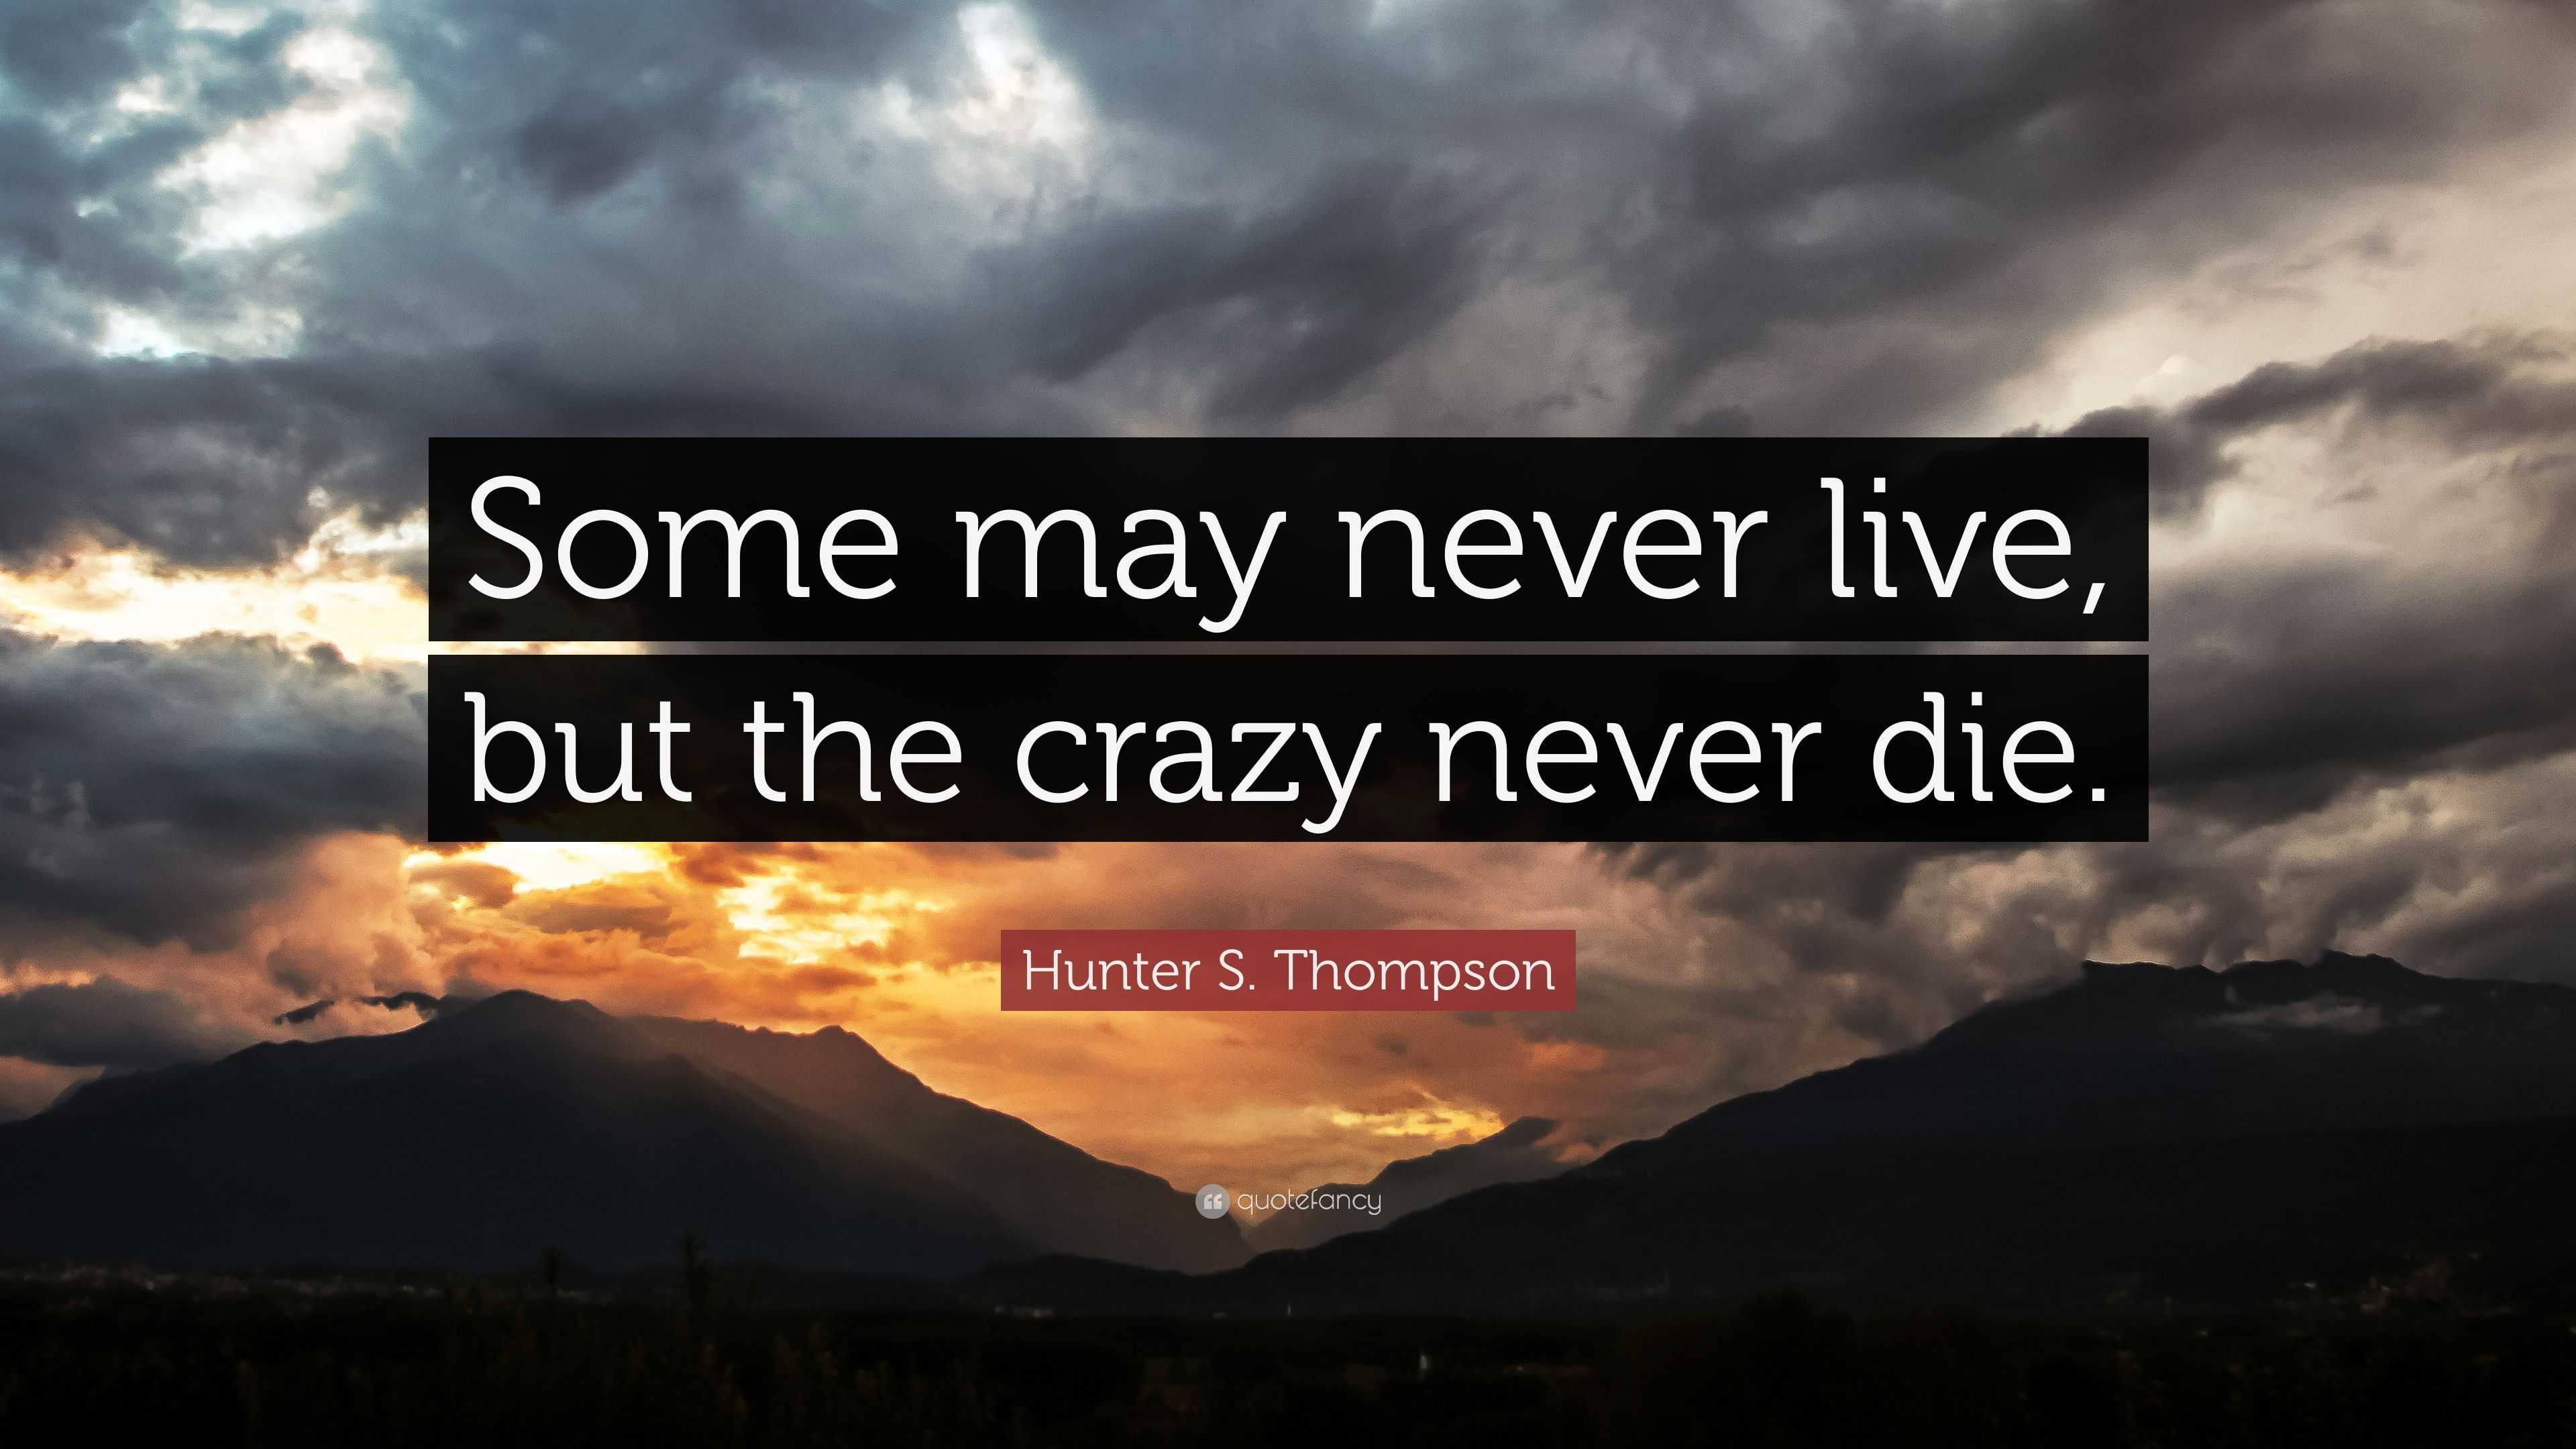 Hunter S. Thompson Quote: “Some may never live, but the crazy never die.”